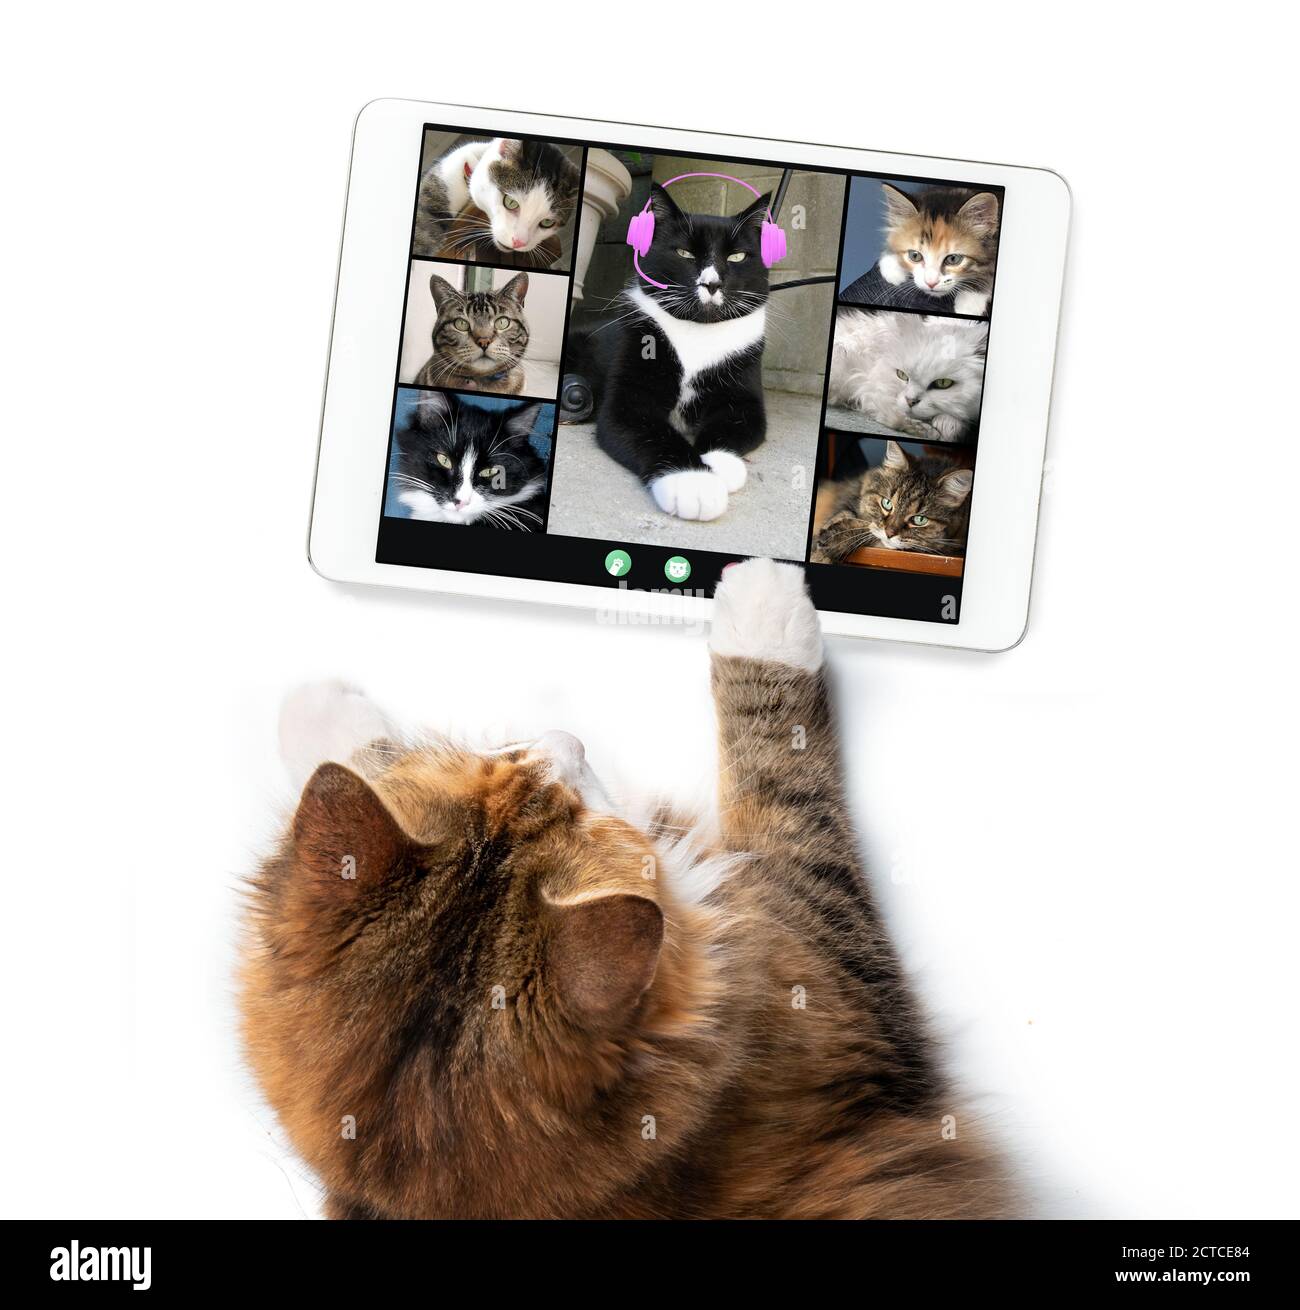 Top view of cat talking to cat friends in video conference, using a tablet. Group of cats having an online meeting. Pets using technology. Stock Photo